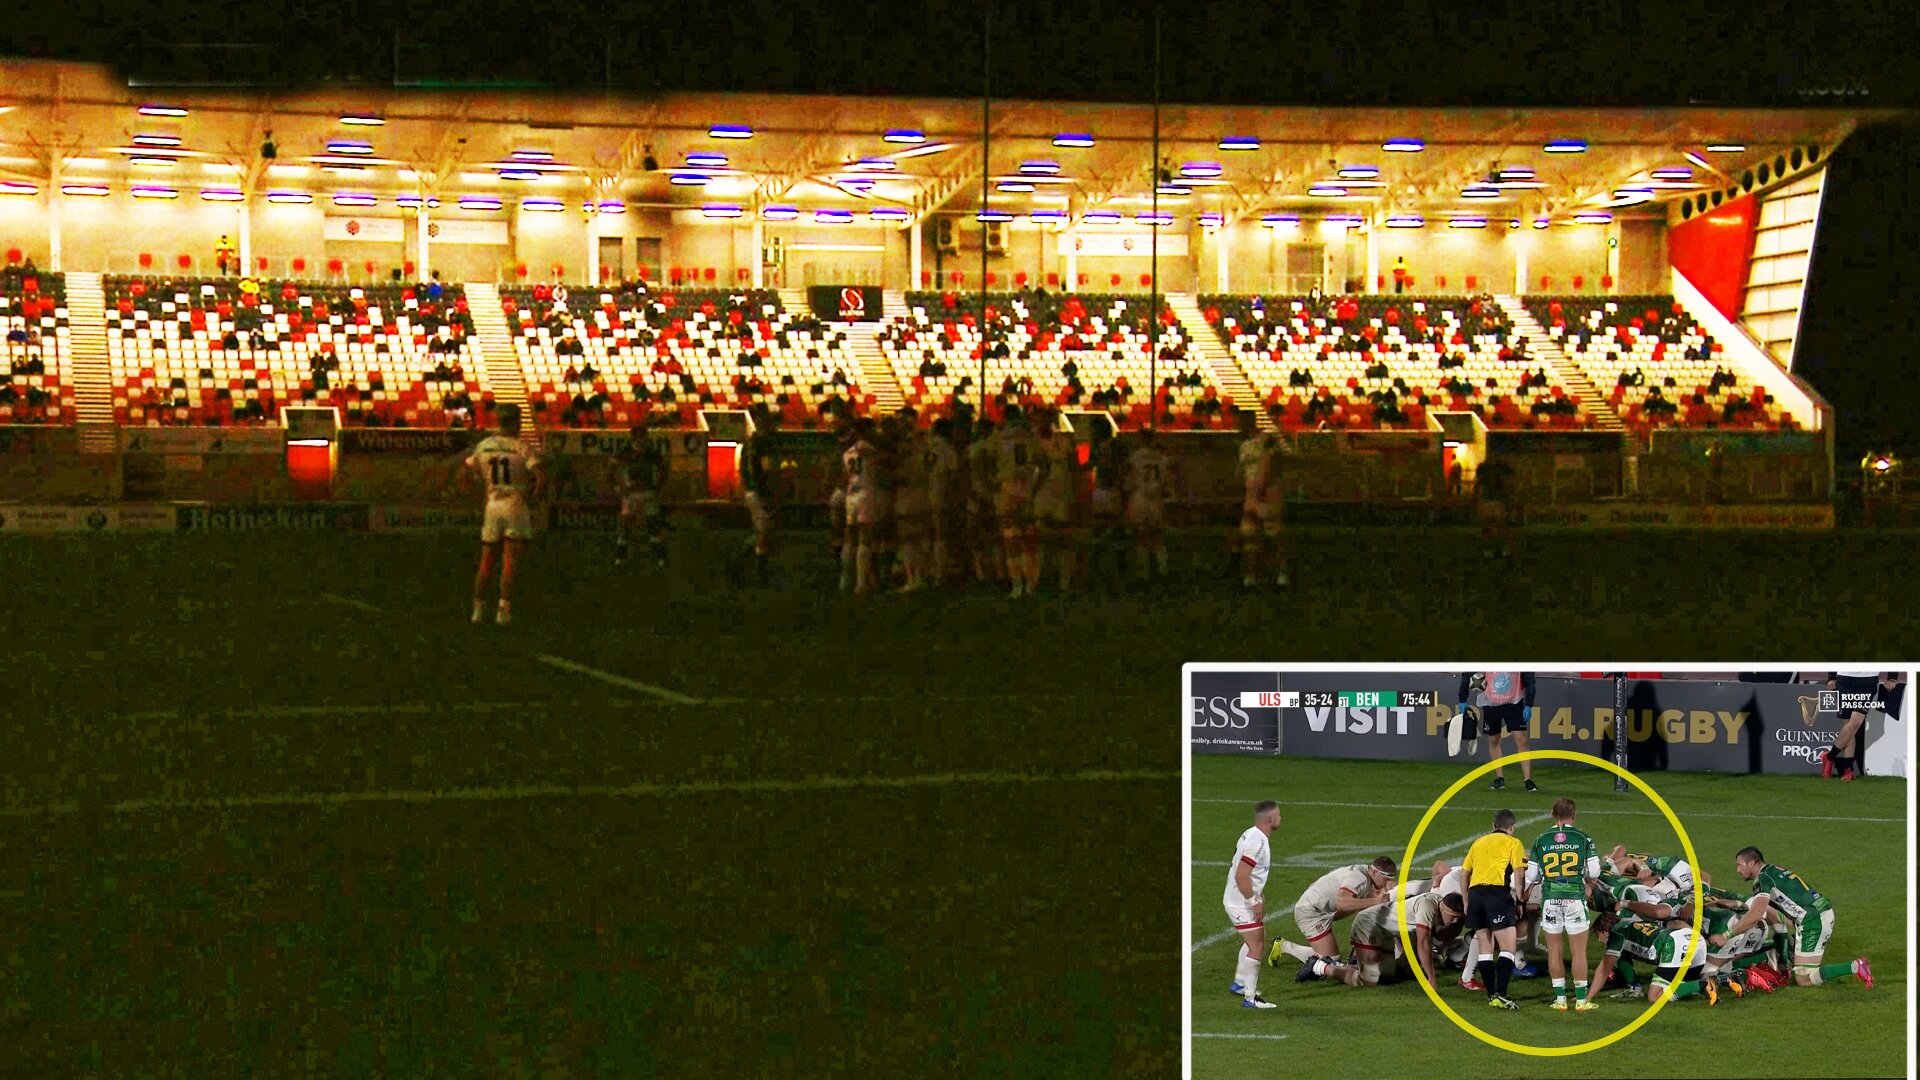 Bizarre scenes in Pro14 as lights go out dangerously just moments before scrum impact at the Kingspan last night